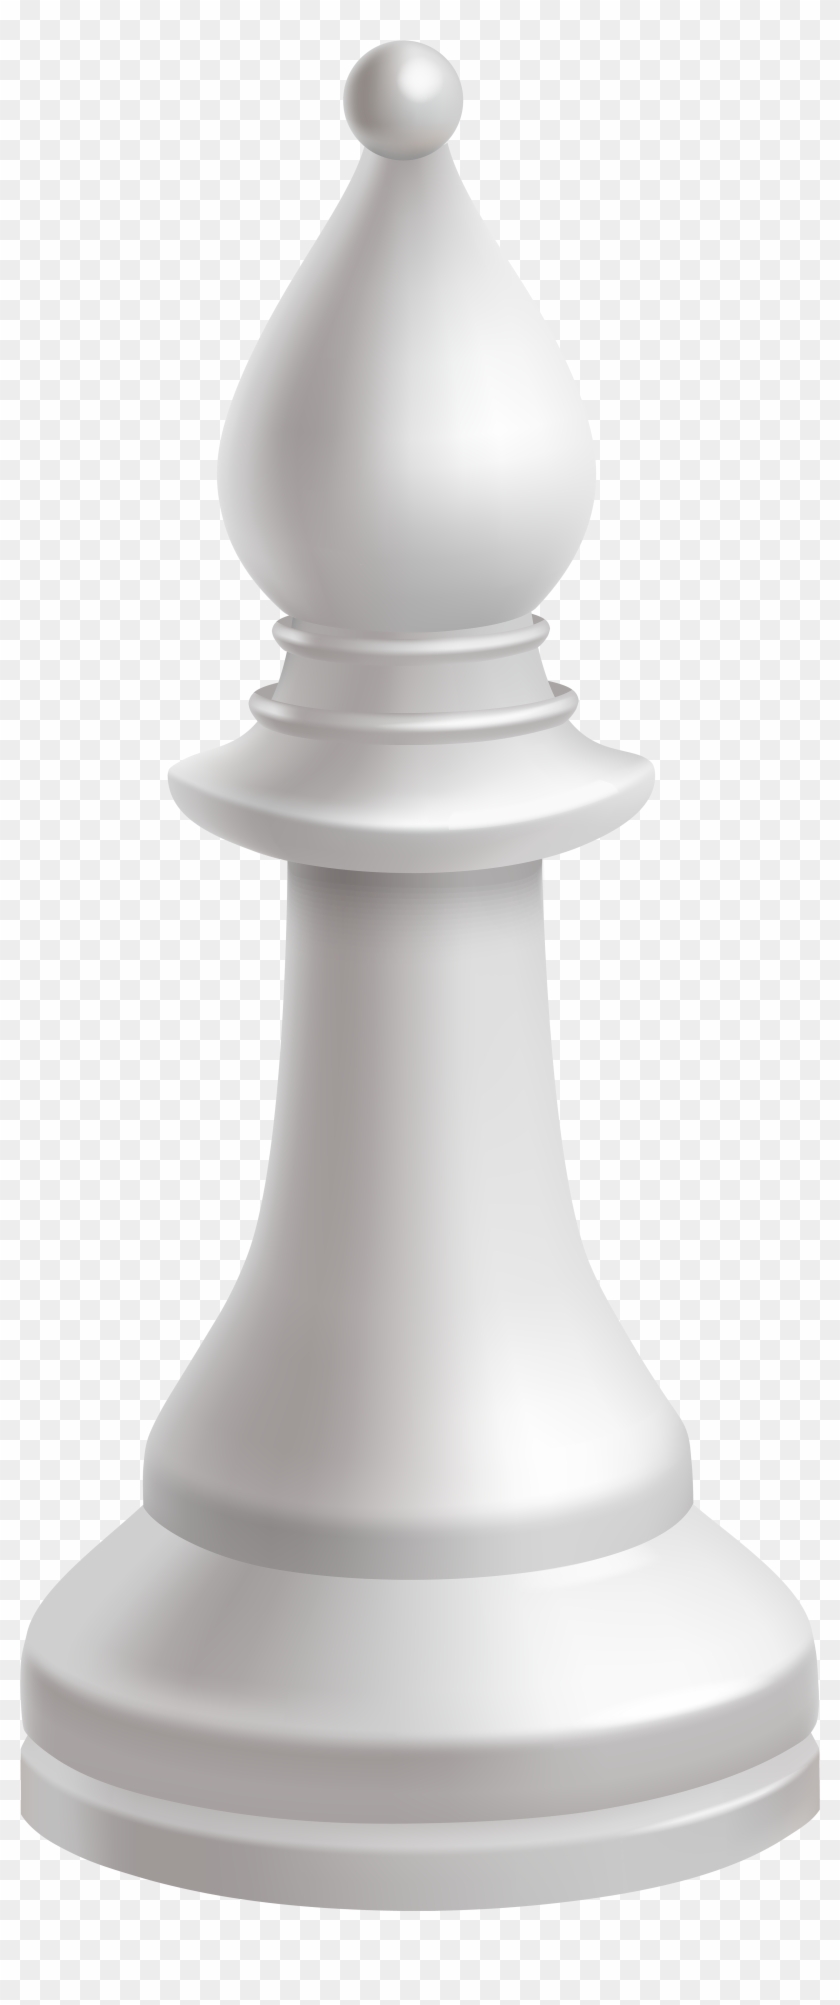 Bishop White Chess Piece Png Clip Art - White King Chess Piece Png Transparent Png #3599808